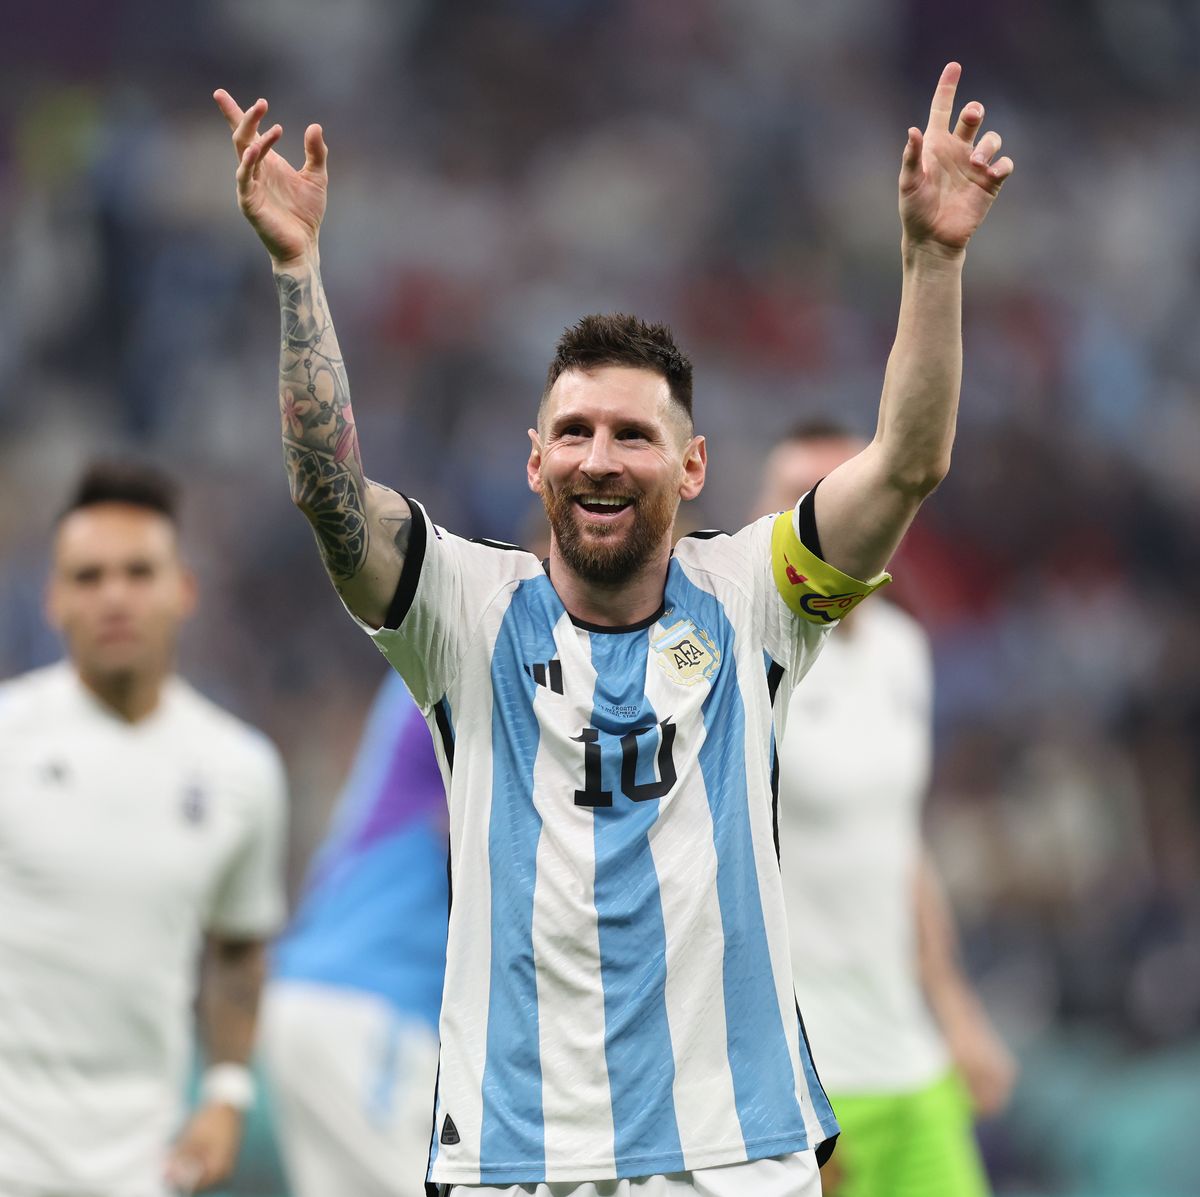 https://hips.hearstapps.com/hmg-prod/images/lionel-messi-of-argentina-celebrates-the-teams-3-0-victory-news-photo-1671106937.jpg?crop=0.668xw:1.00xh;0.167xw,0&resize=1200:*